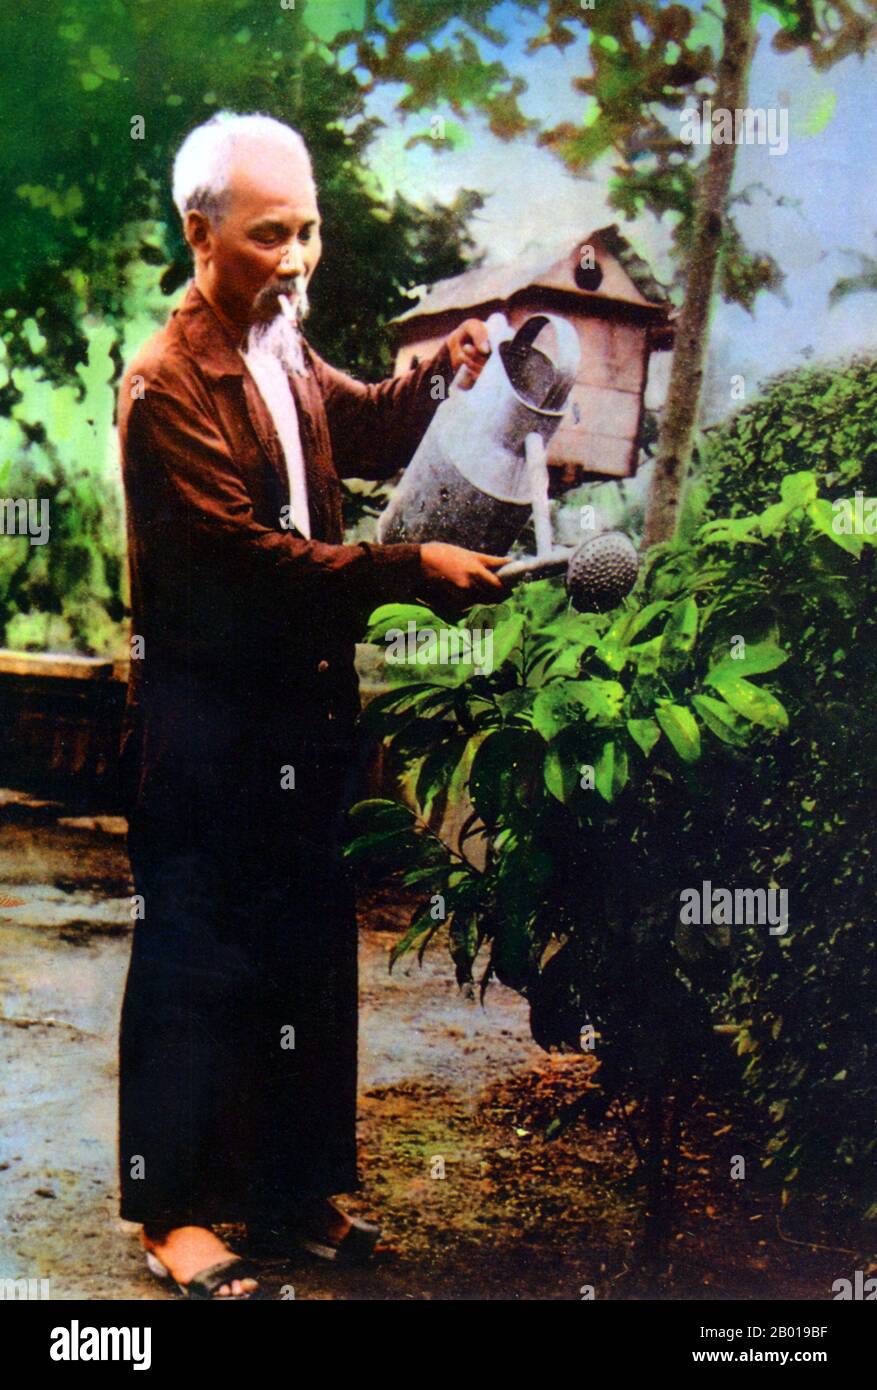 Vietnam: President Ho Chi Minh (19 May 1890 - 3 September 1969) tending his garden in the grounds of the Presidential Palace, Hanoi, c. 1956.  Hồ Chí Minh, born Nguyễn Sinh Cung and also known as Nguyễn Ái Quốc was a Vietnamese Communist revolutionary leader who was prime minister (1946-1955) and president (1945-1969) of the Democratic Republic of Vietnam (North Vietnam). He formed the Democratic Republic of Vietnam and led the Viet Cong during the Vietnam War until his death. Stock Photo